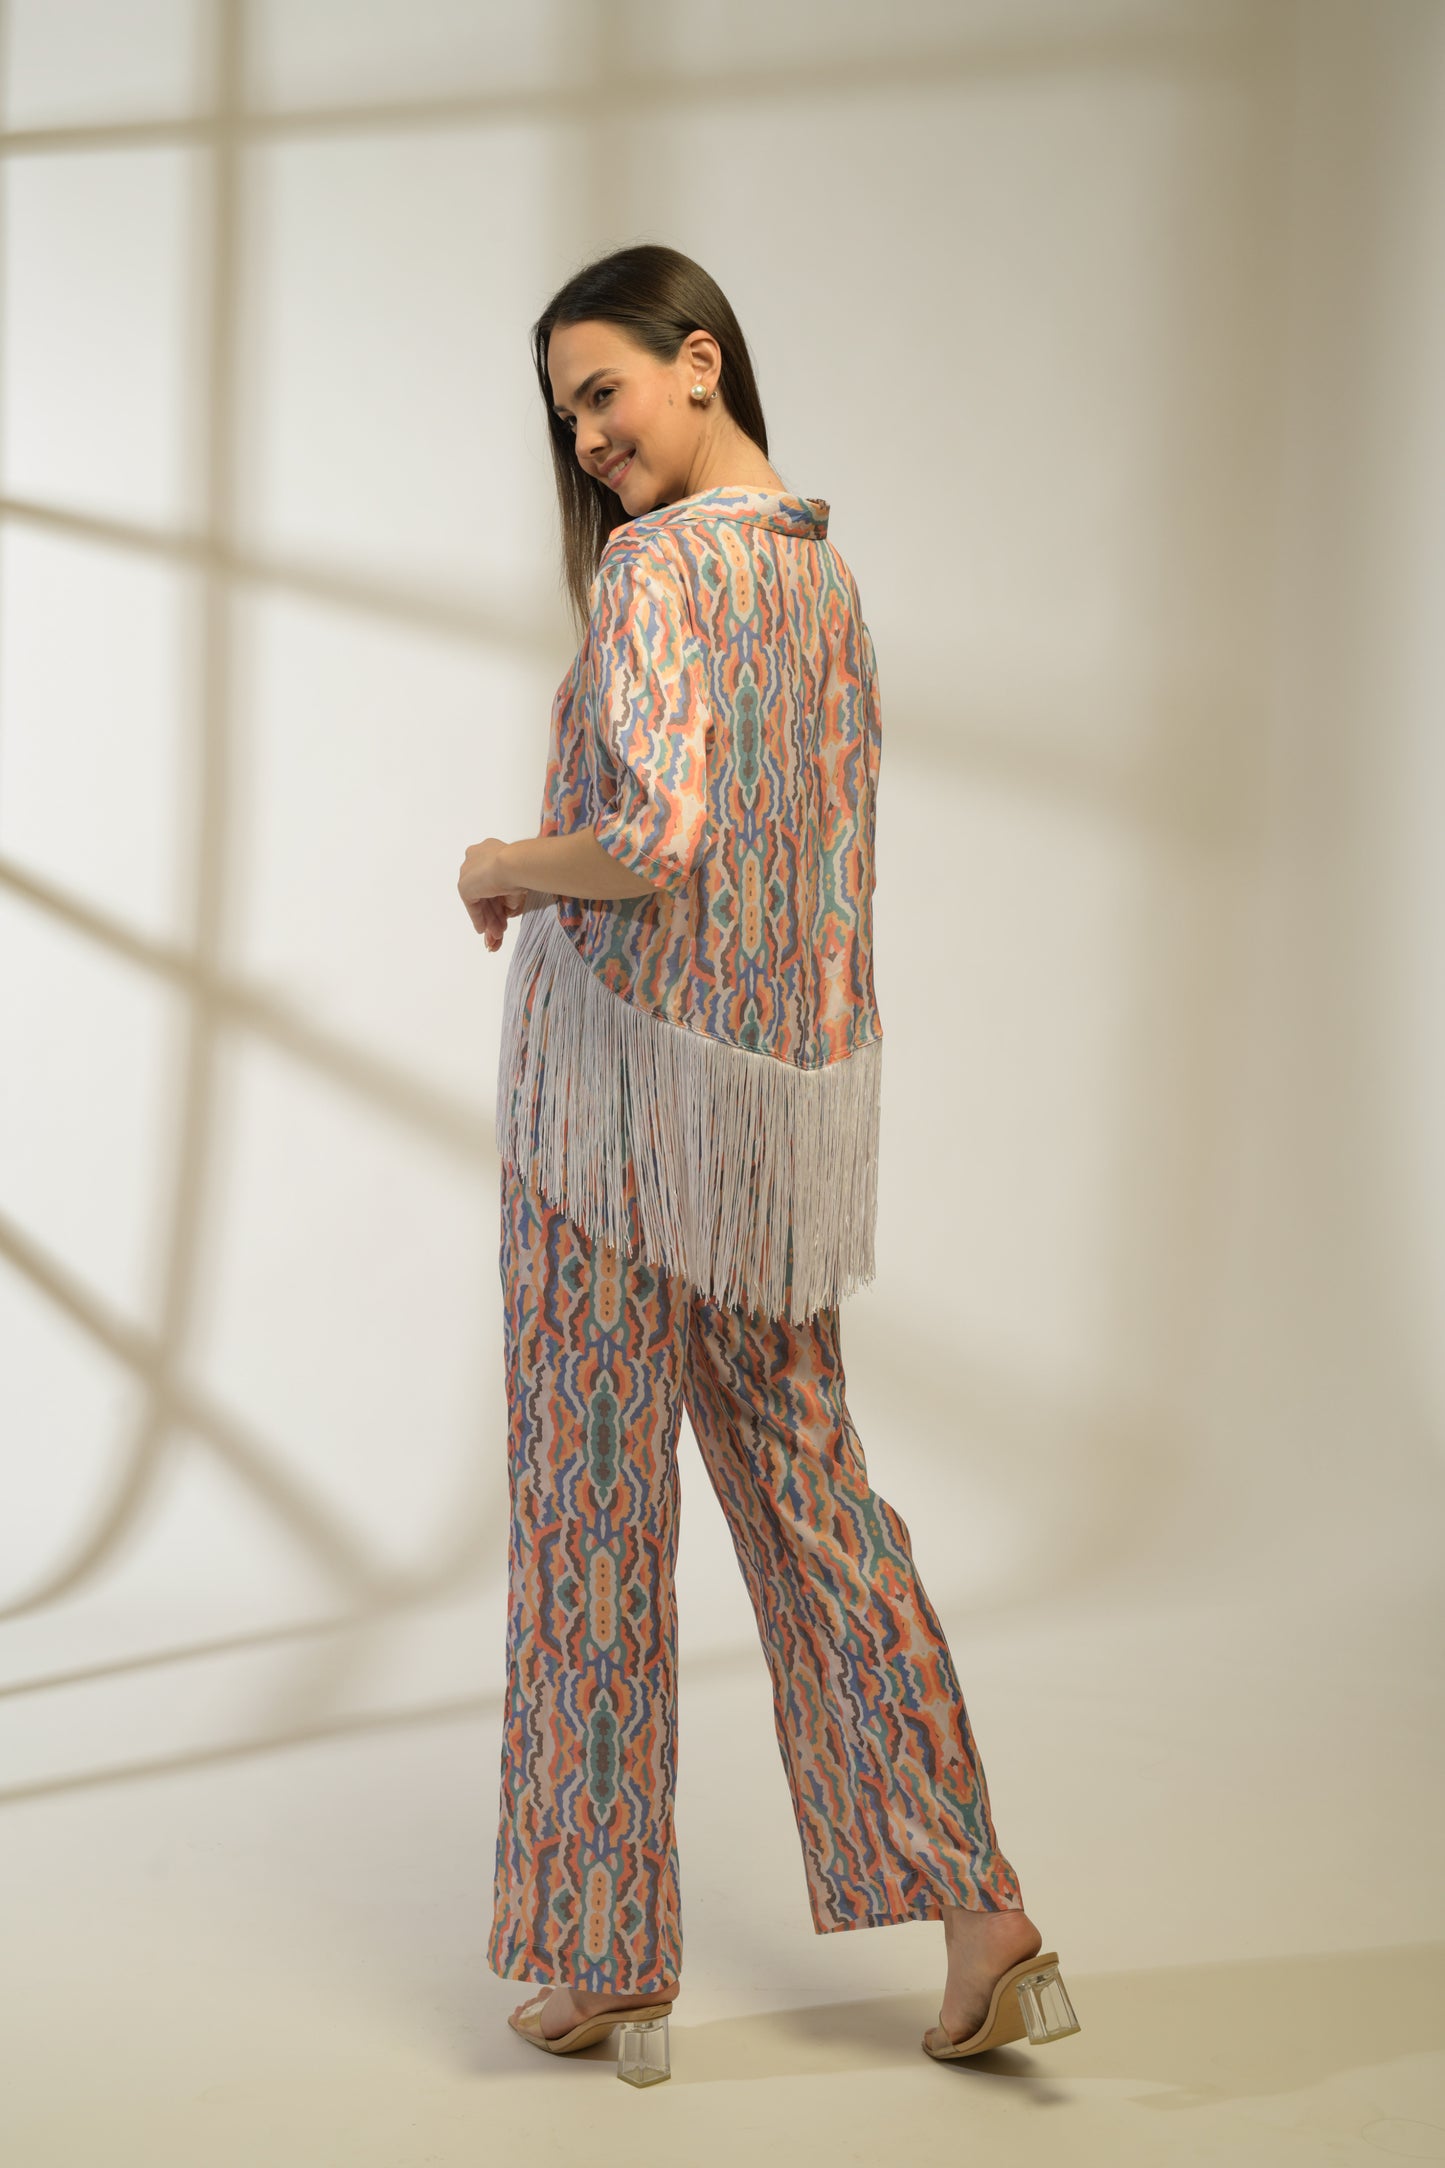 Kelly Boxy Shirt in Printed Viscose Crepe with Fringe Detailing and straight fit pants - Set of 2